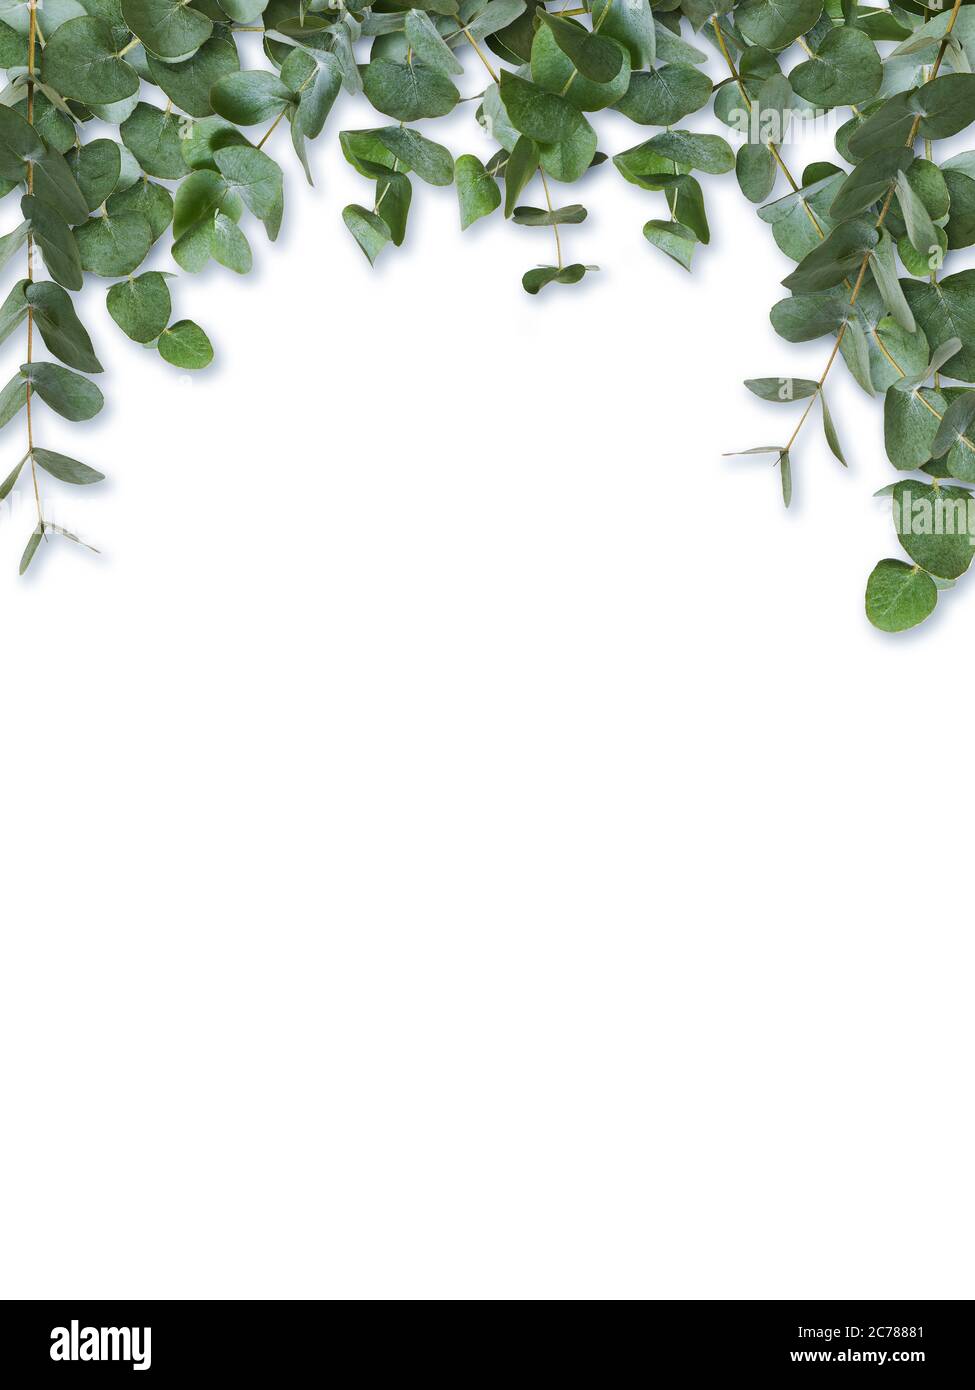 Eucalyptus green leaves and branches isolated on white background. Stock Photo